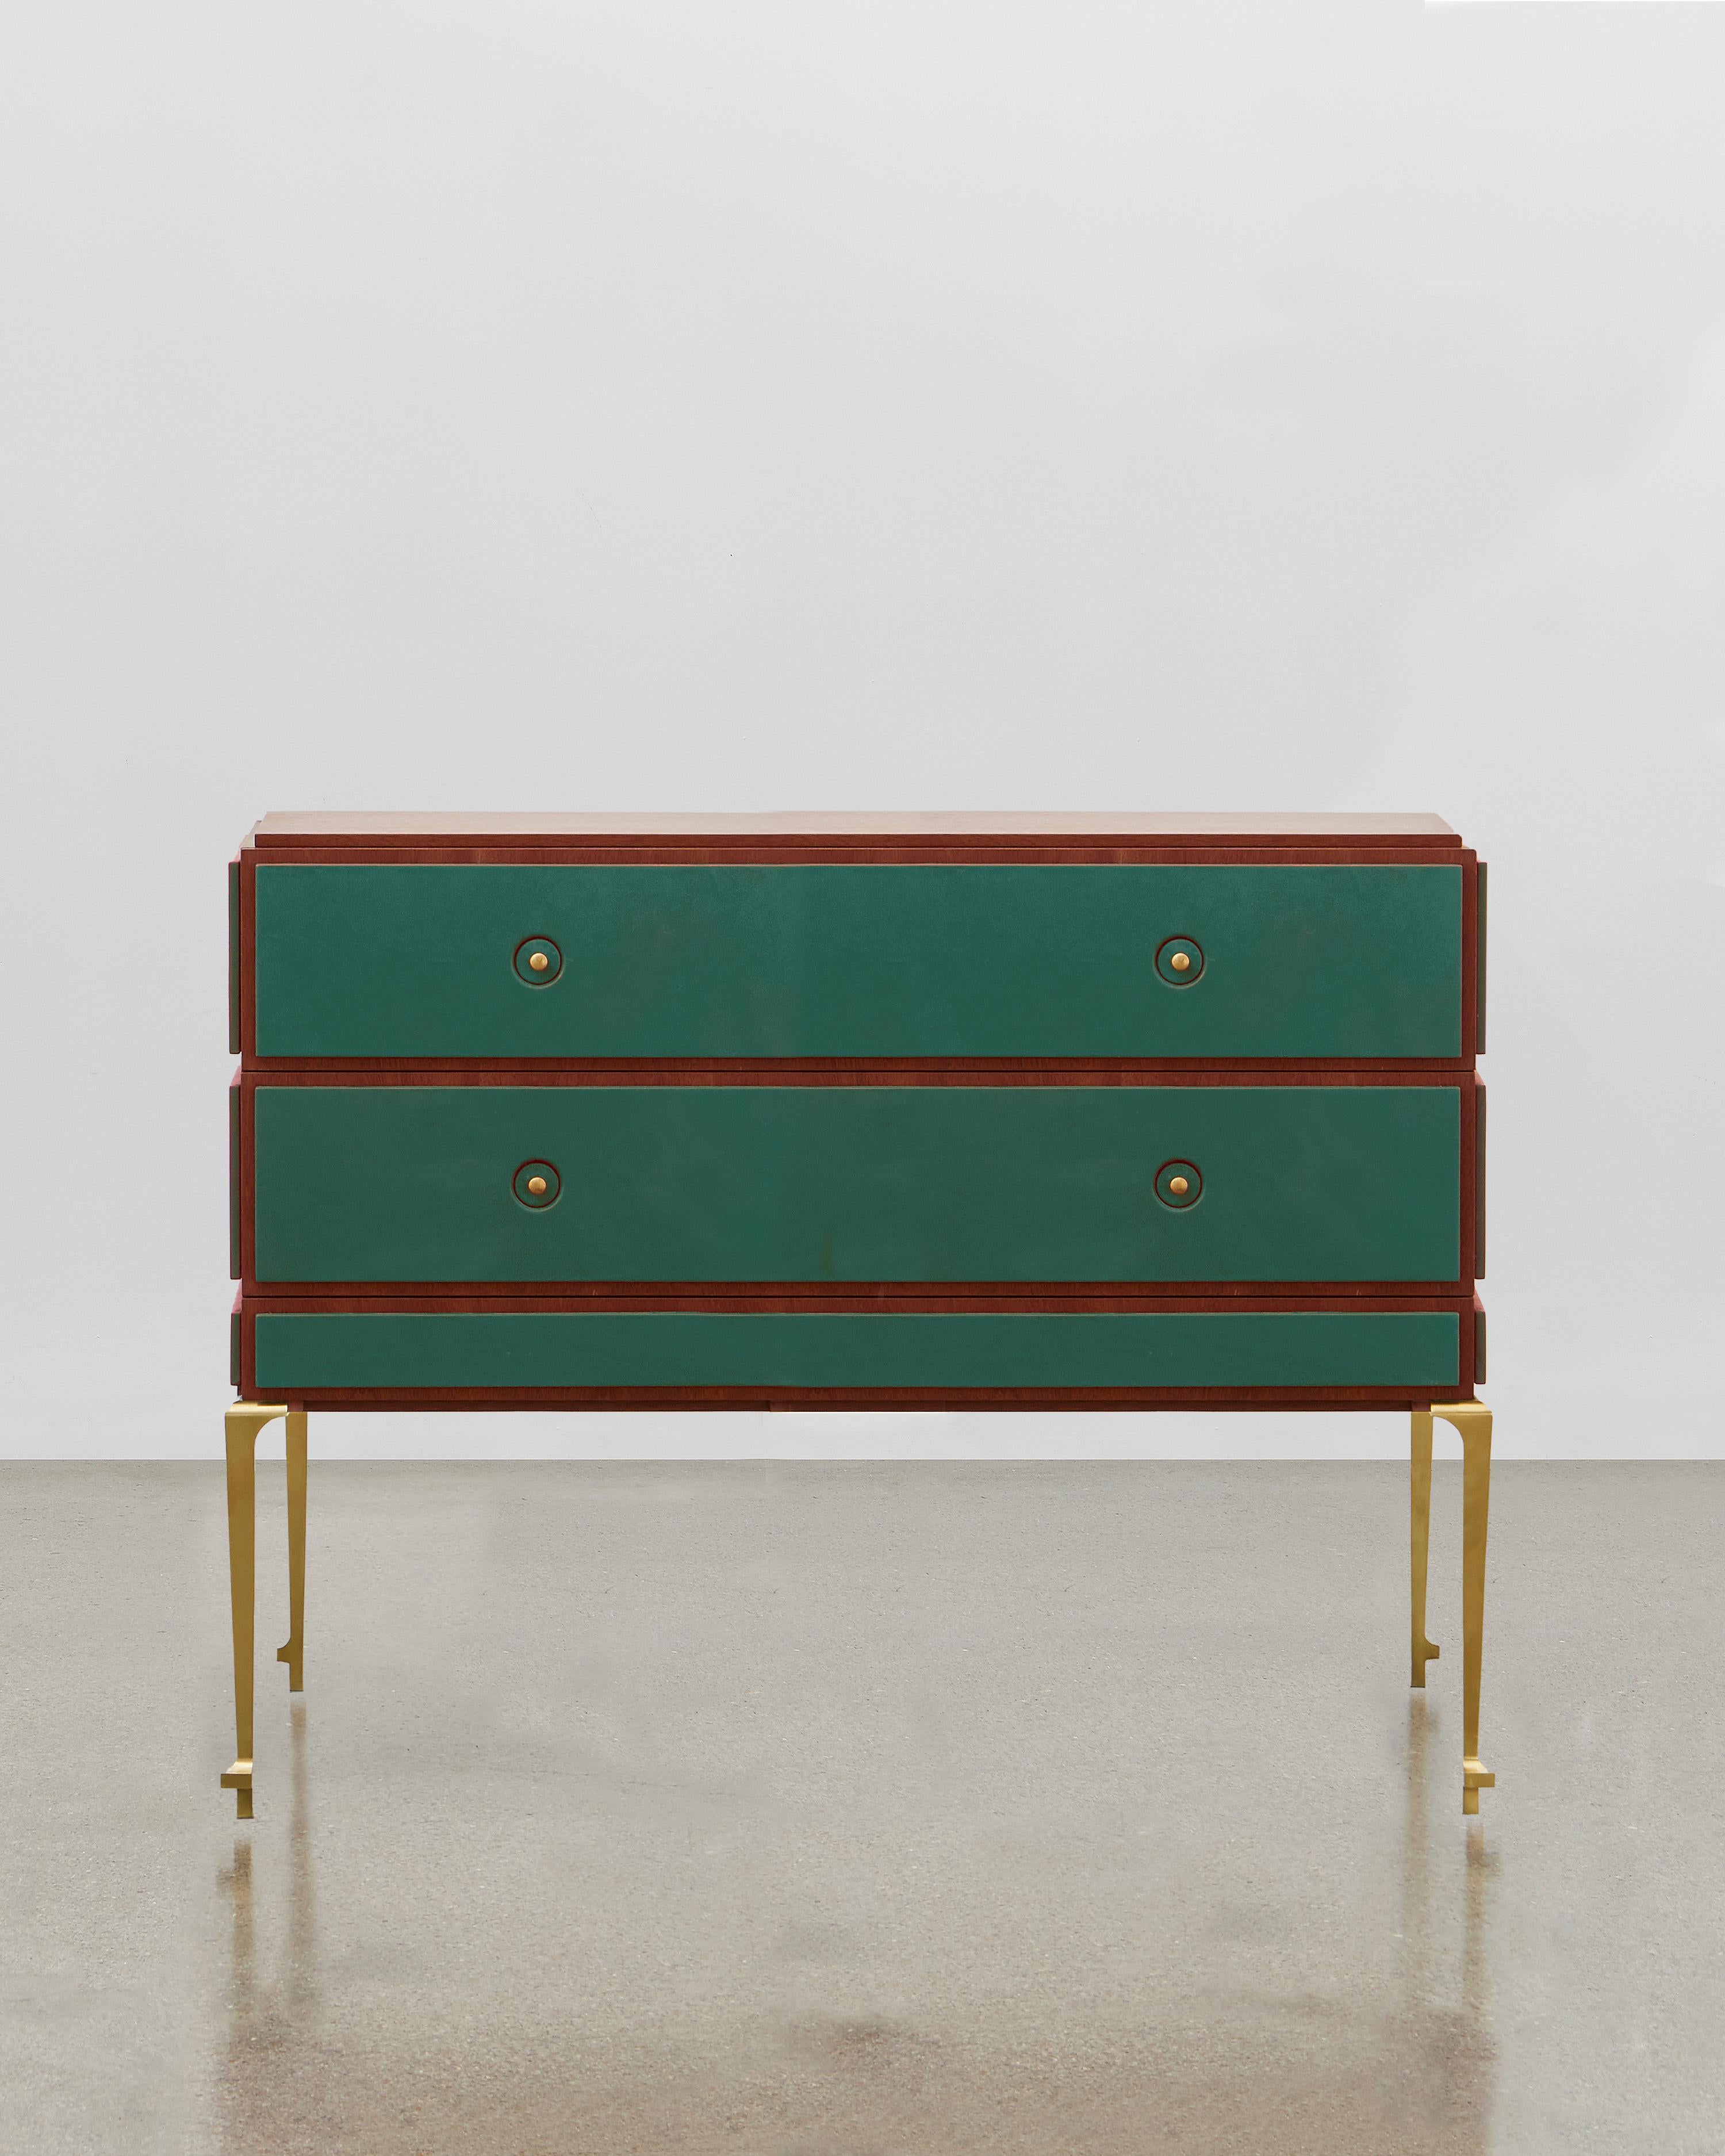 Created so it can be placed in the centre of a room, away from a wall, Poul Henningsen’s grand chest of drawers features wooden panels on all sides. It is designed to be admired and considered from every angle.

This piece highlights the distinctive